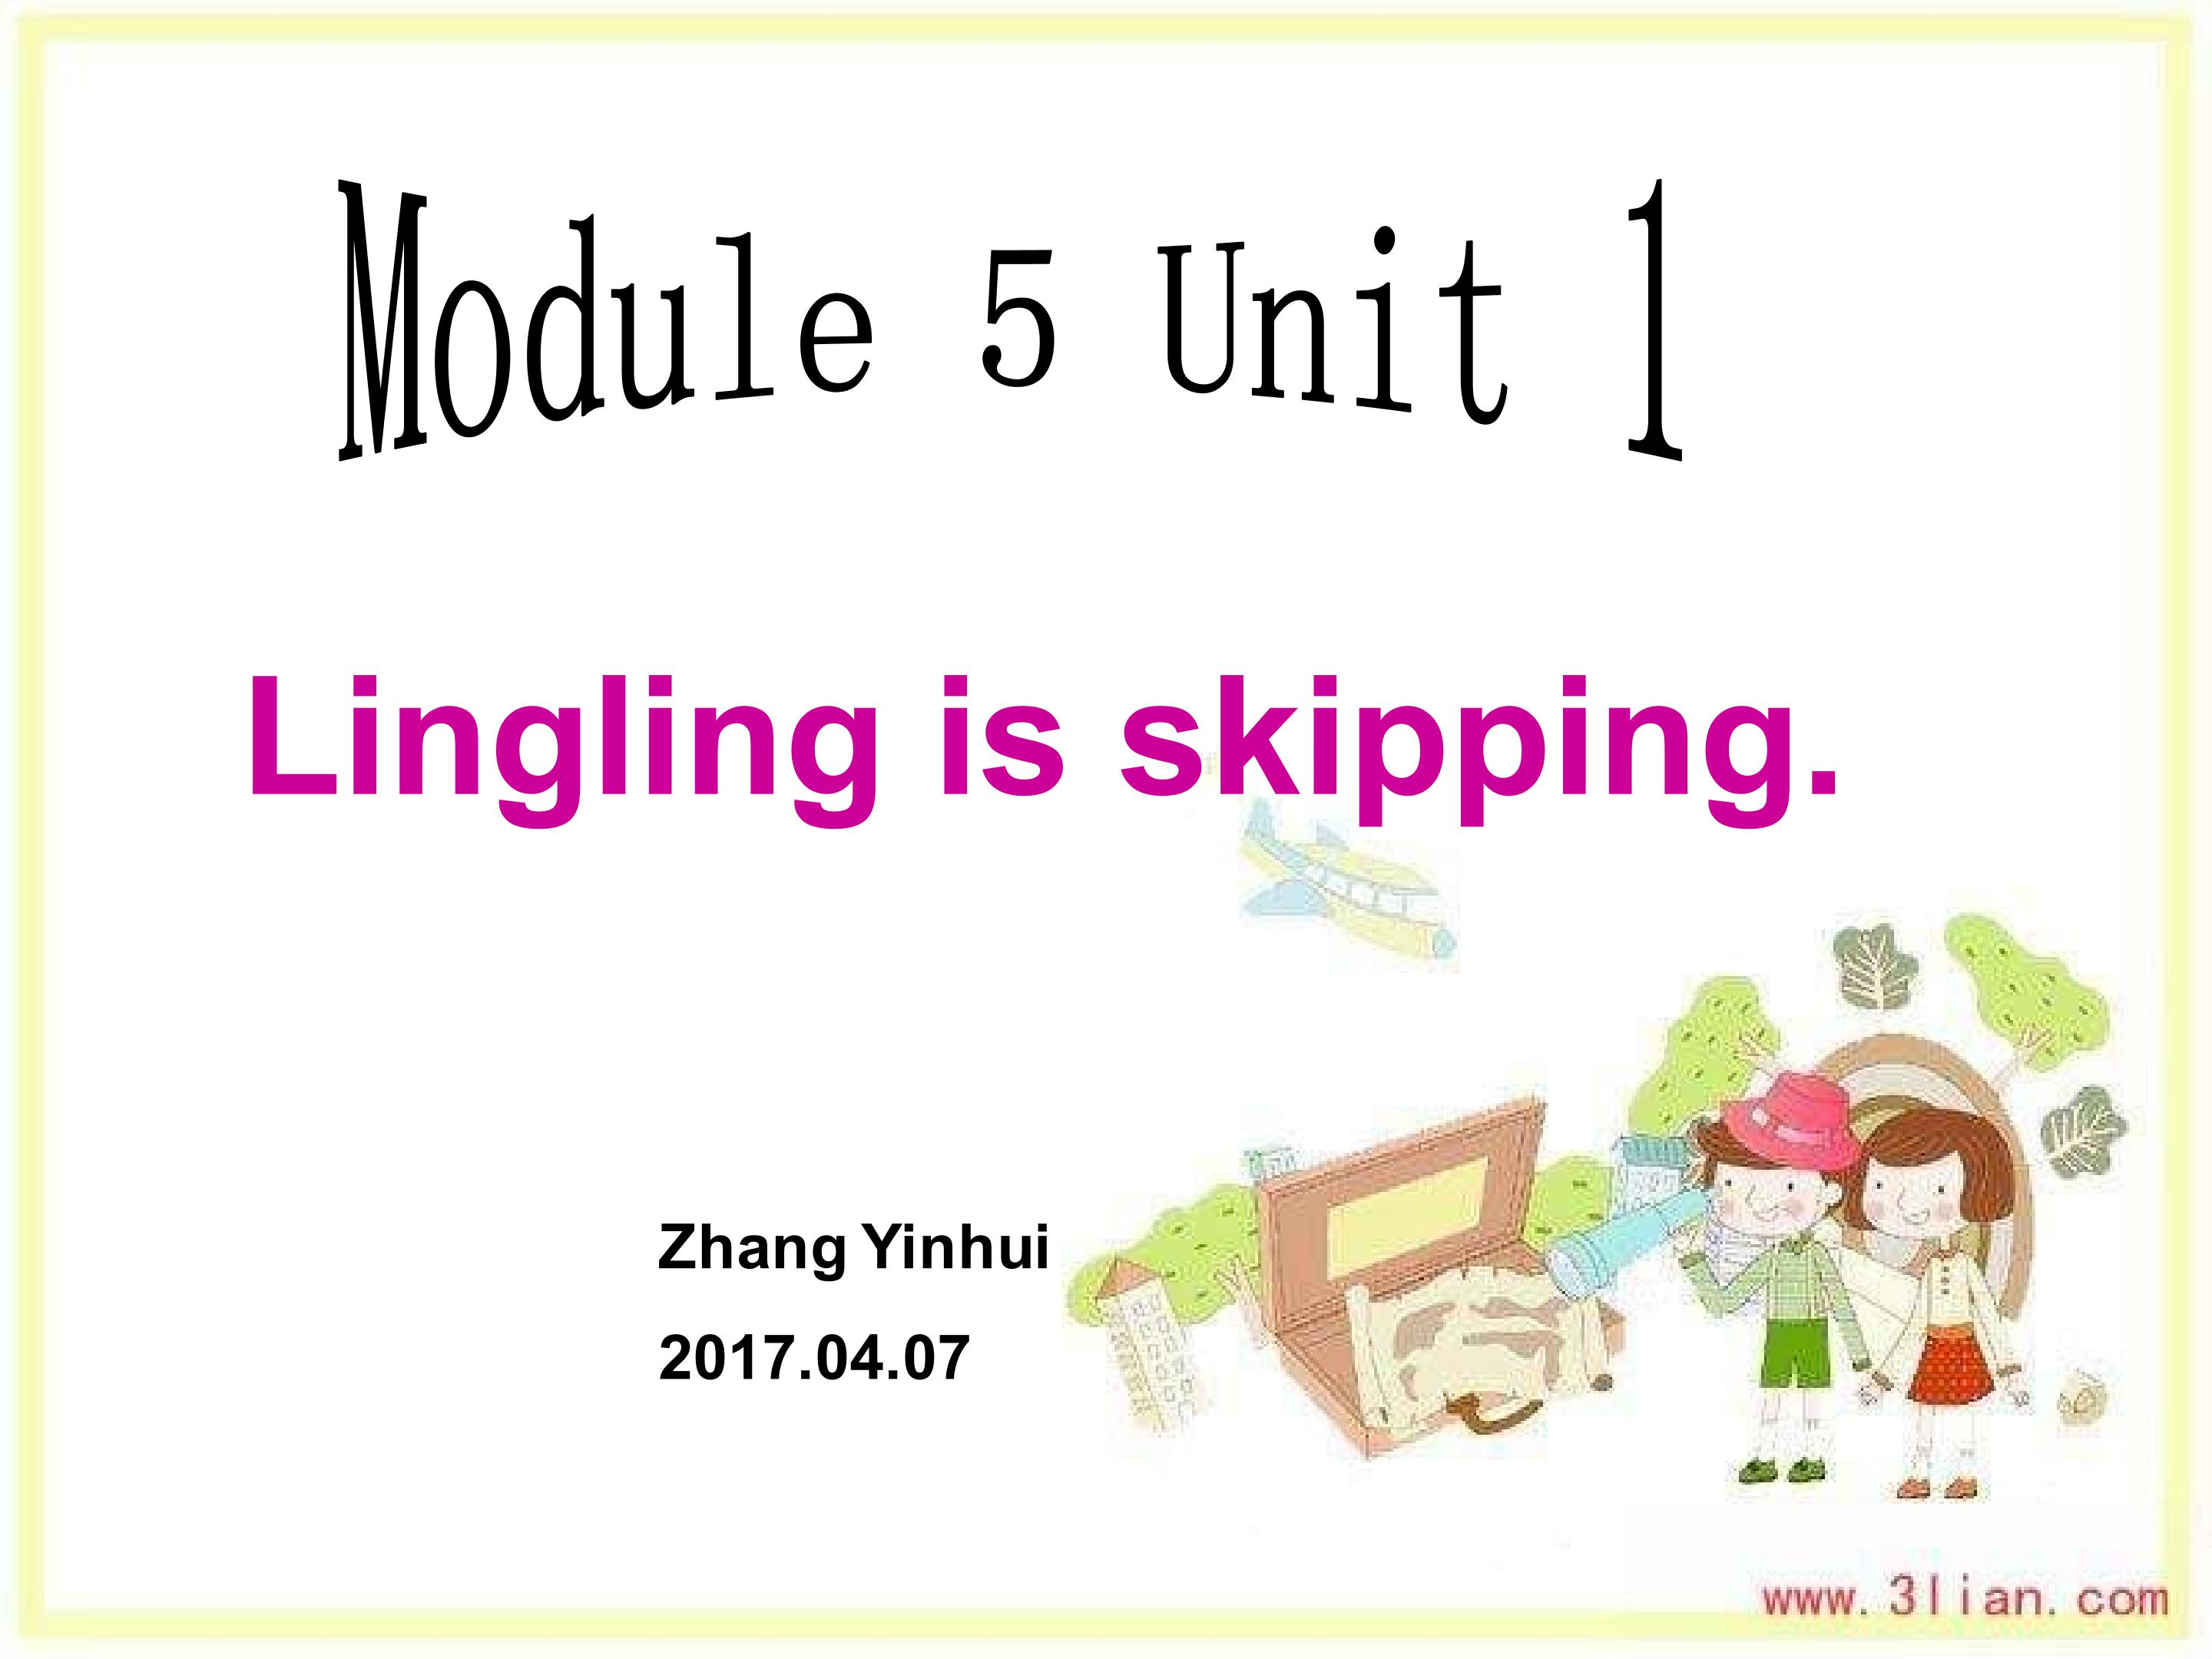 Unit 1 Lingling is skipping.